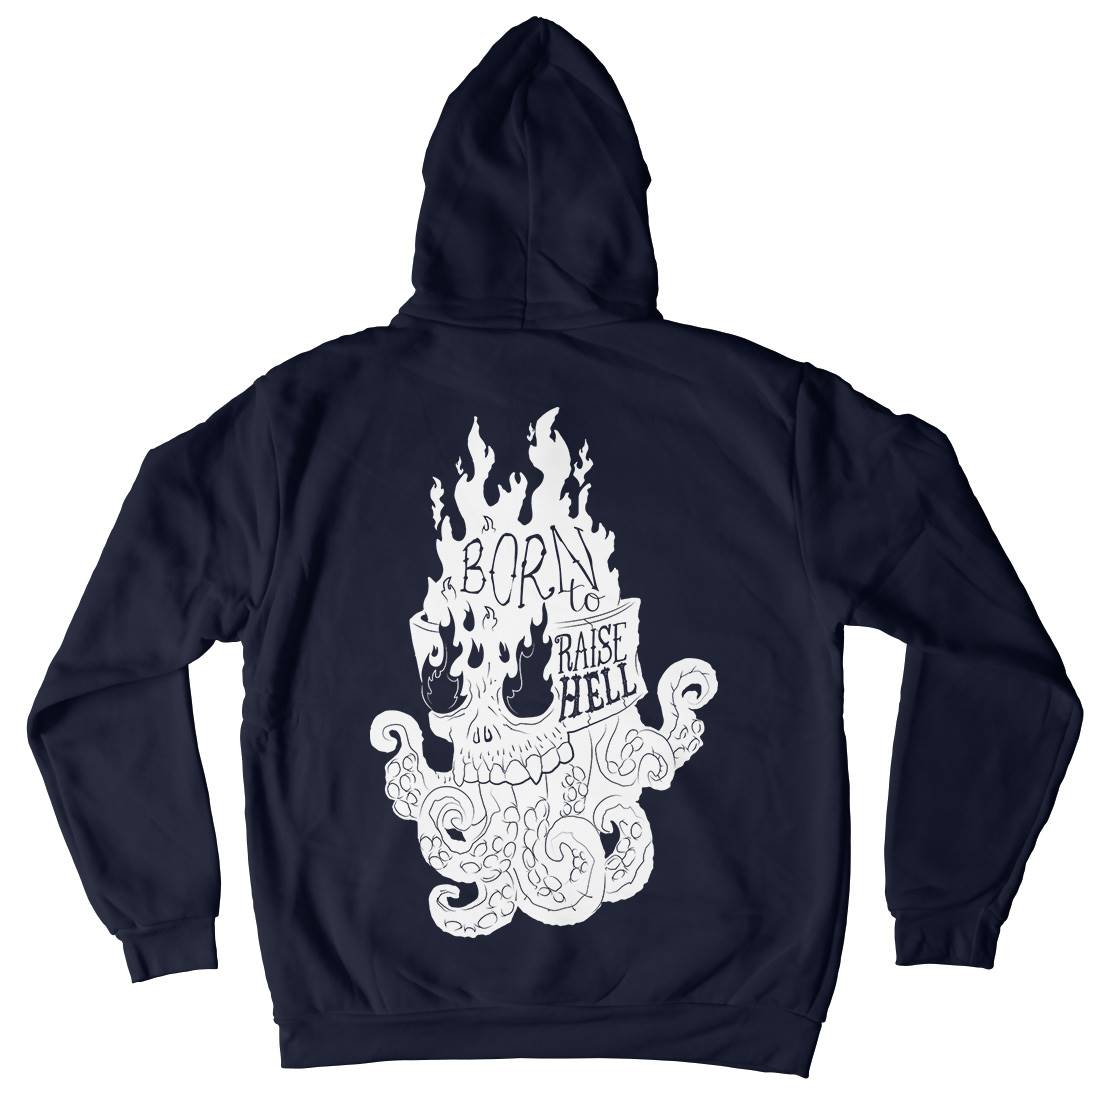 Raise Hell Mens Hoodie With Pocket Motorcycles A960